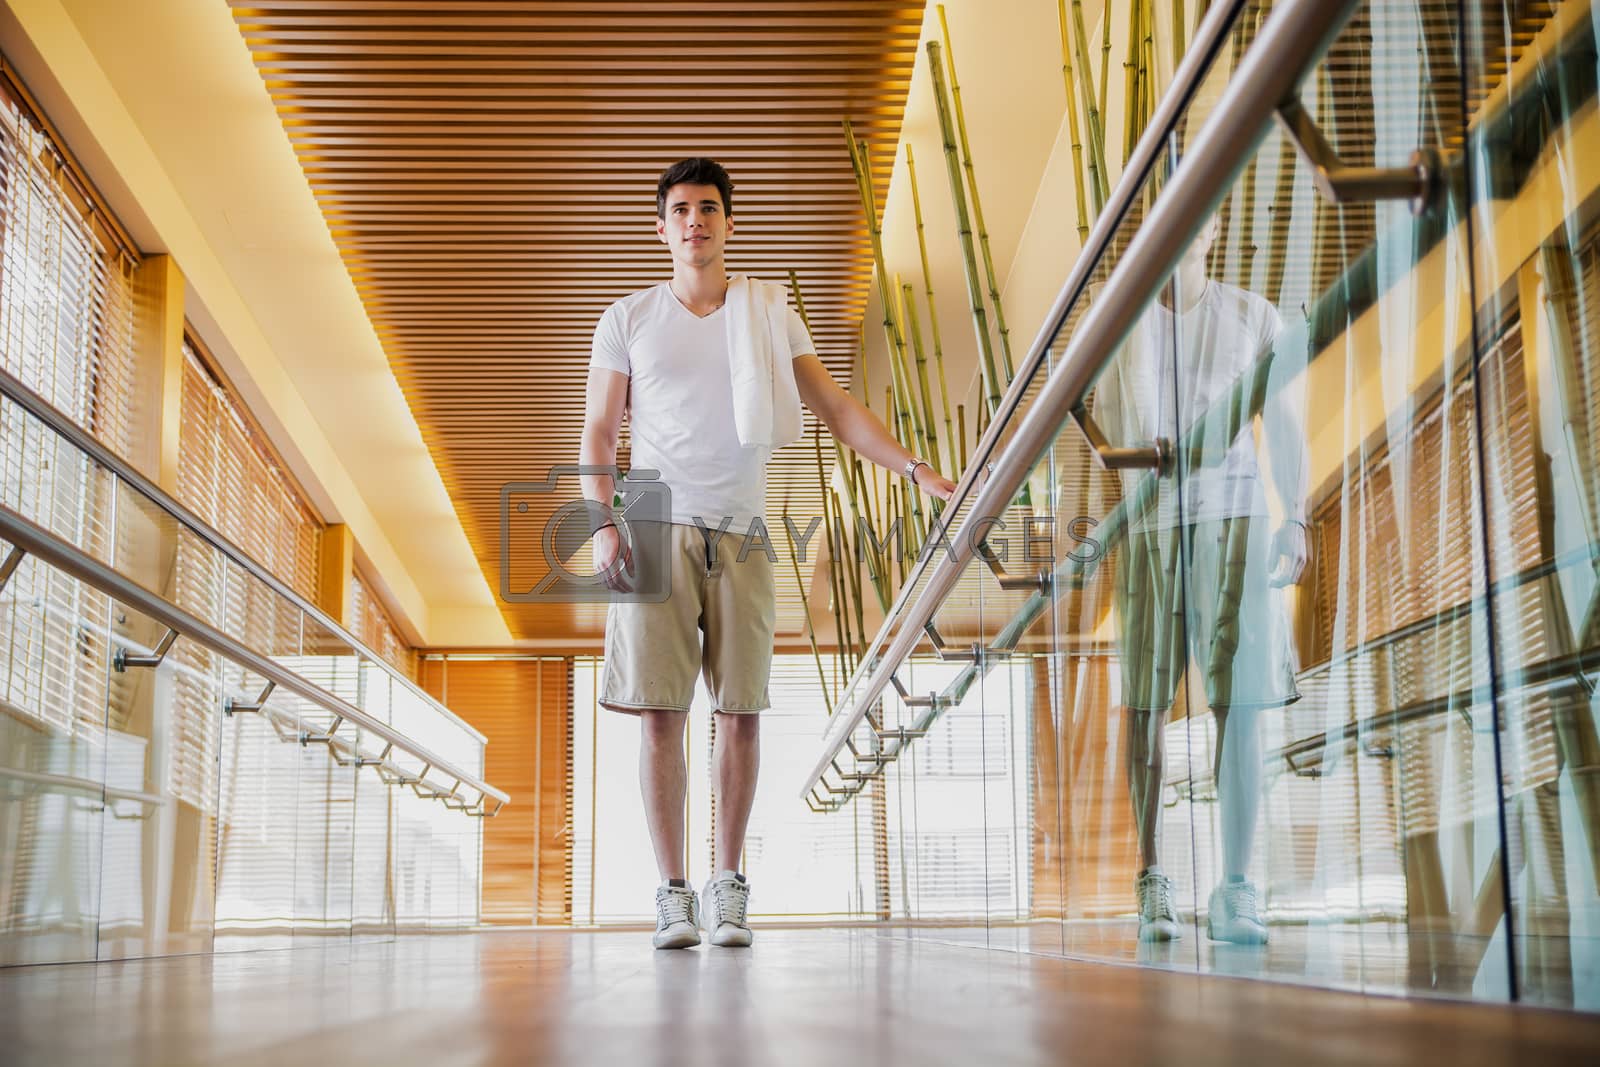 Royalty free image of Young Man Standing in Hallway Holding Hand Rail by artofphoto